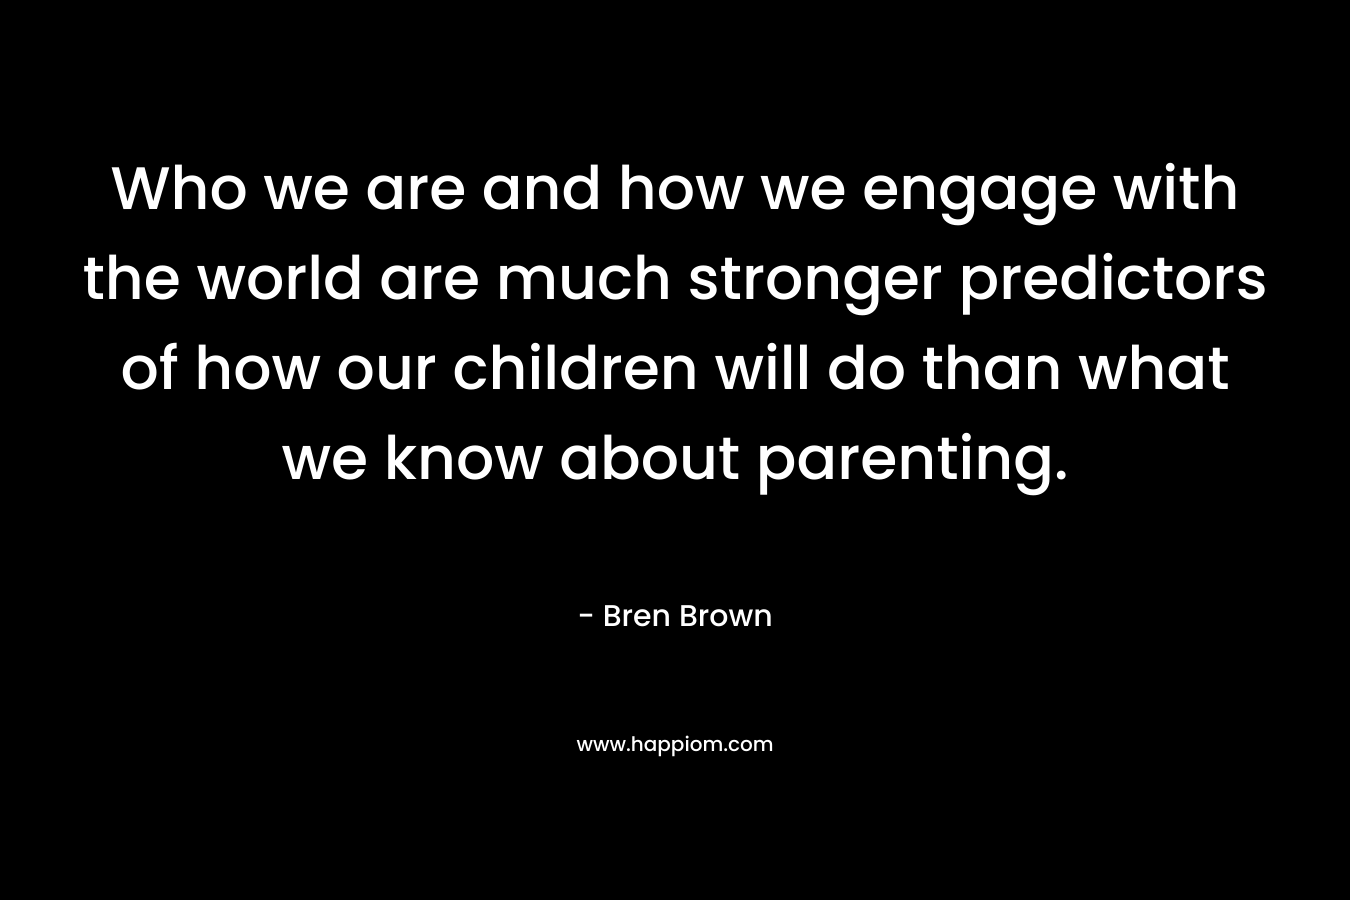 Who we are and how we engage with the world are much stronger predictors of how our children will do than what we know about parenting. – Bren Brown